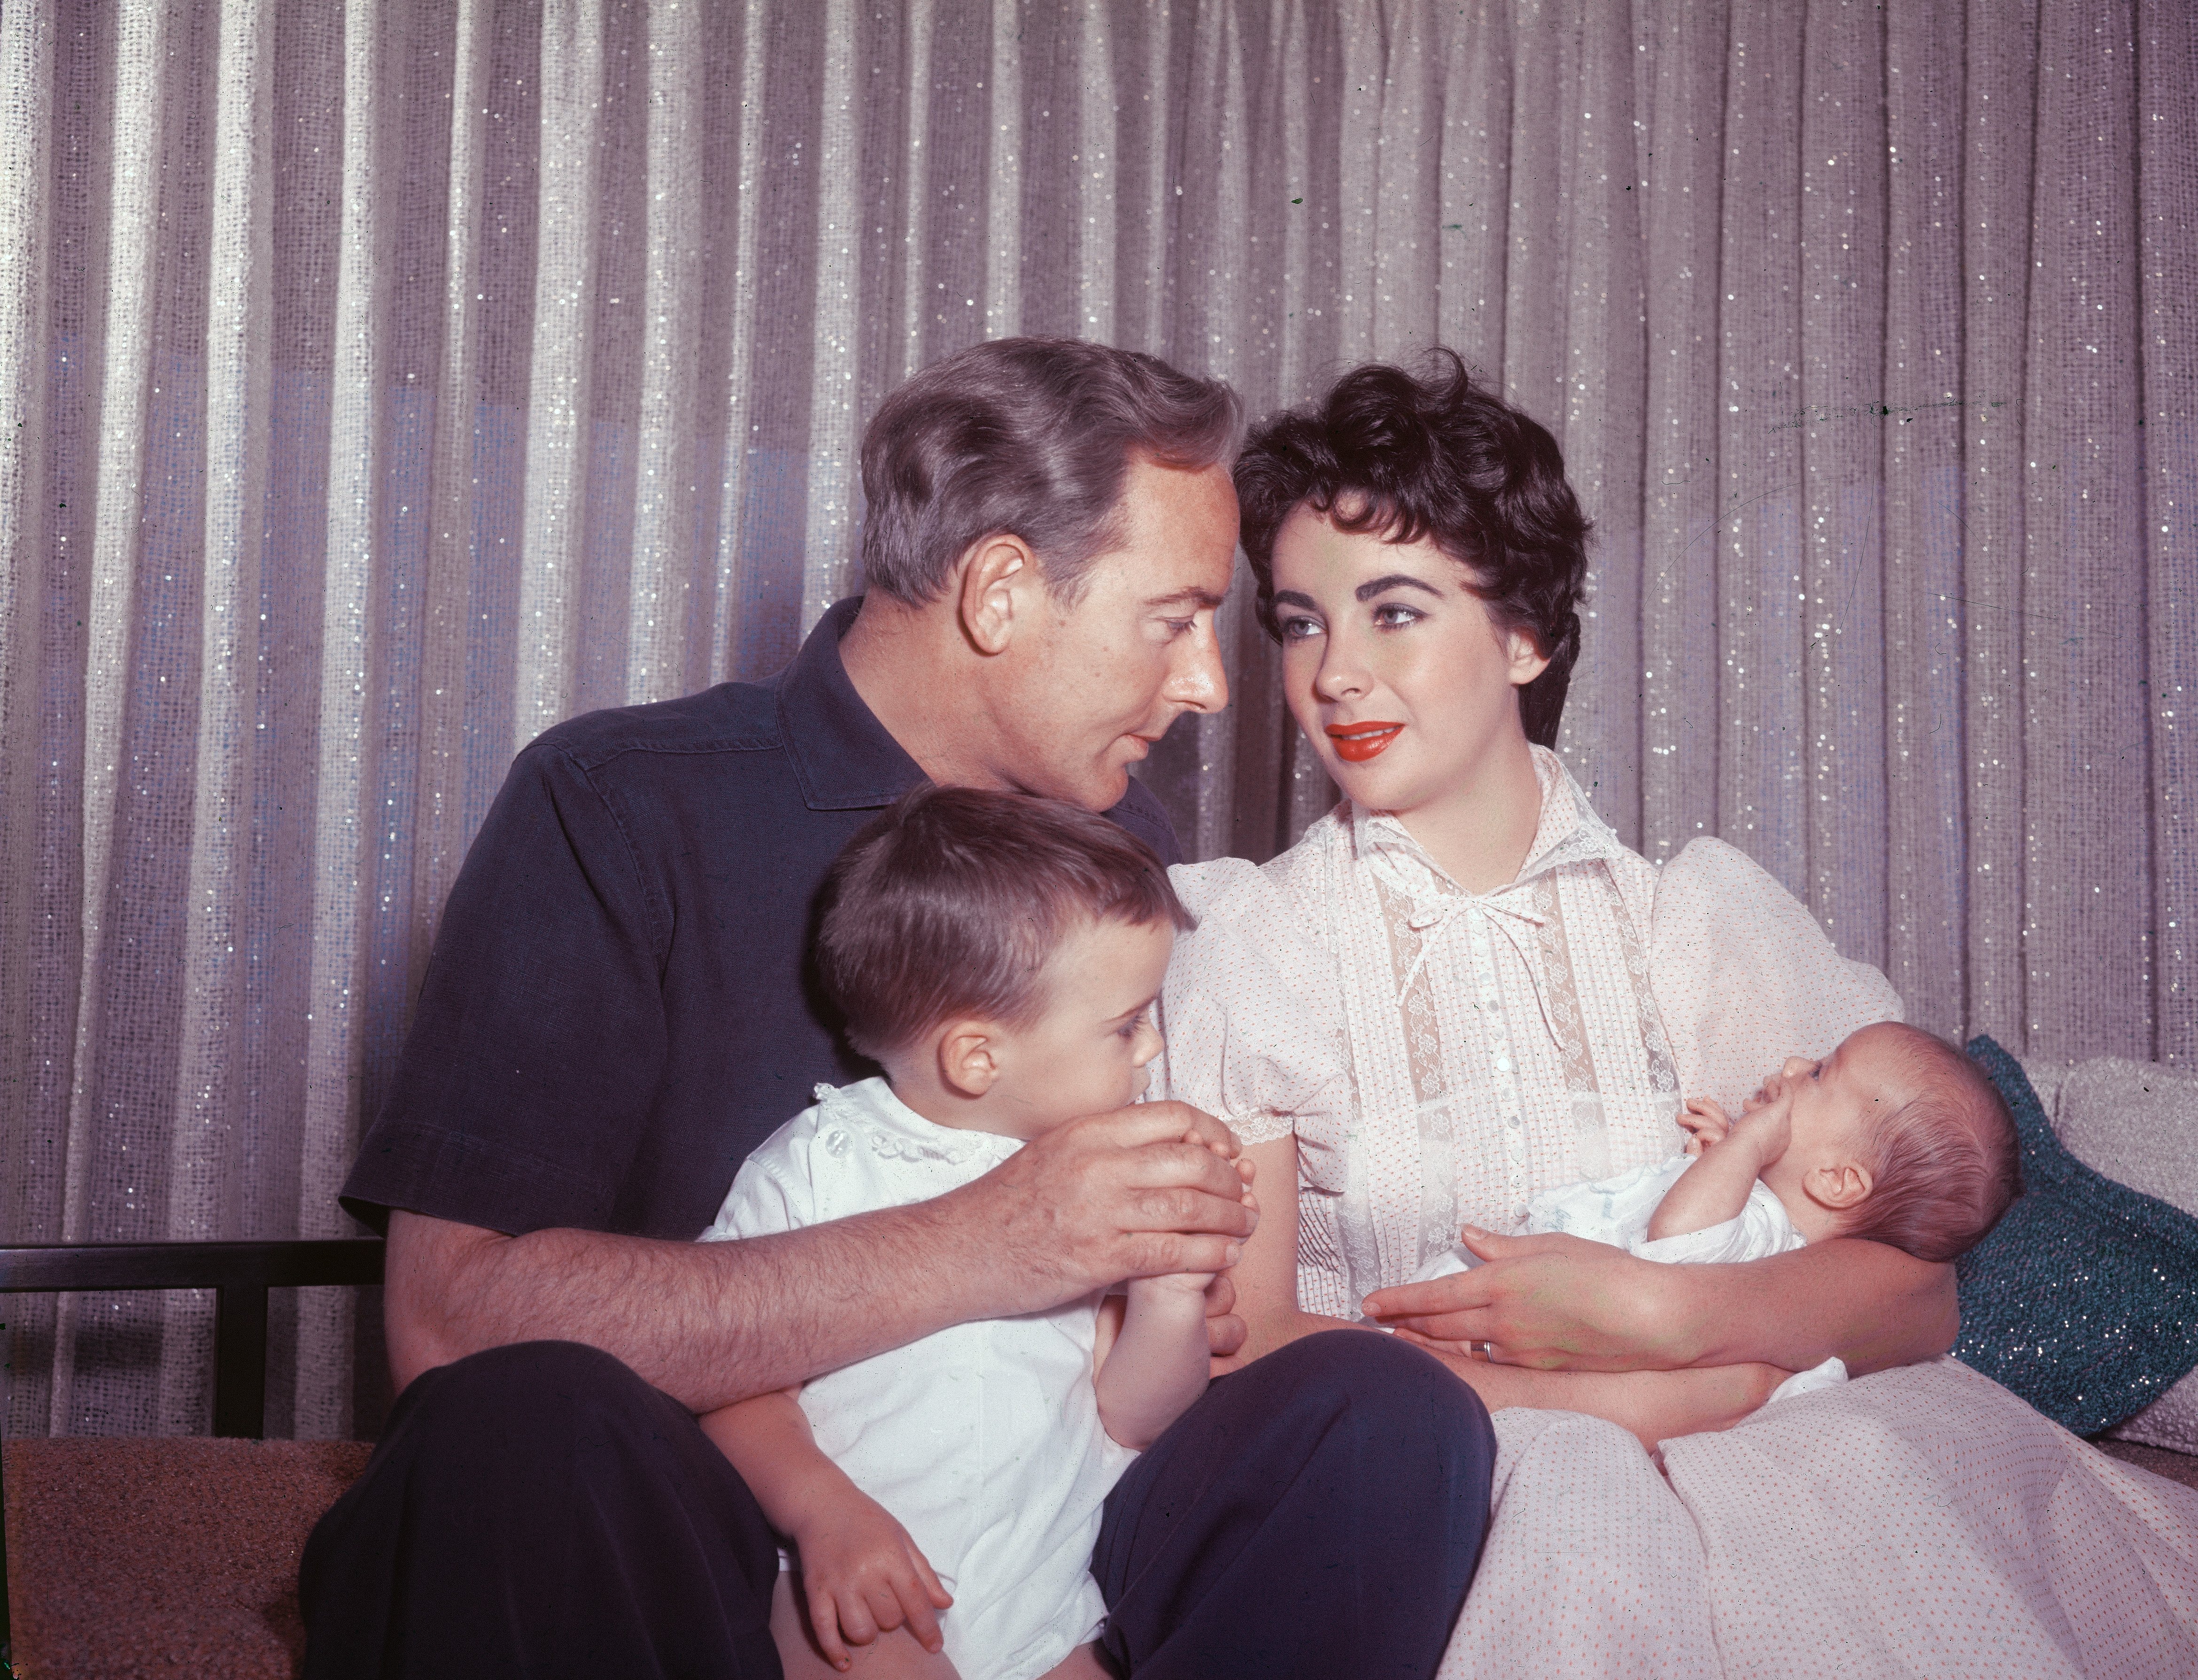 Elizabeth Taylor, Michael Wilding, Michael Jr, and Christopher, Los Angeles, California, 1955 | Source: Getty Images